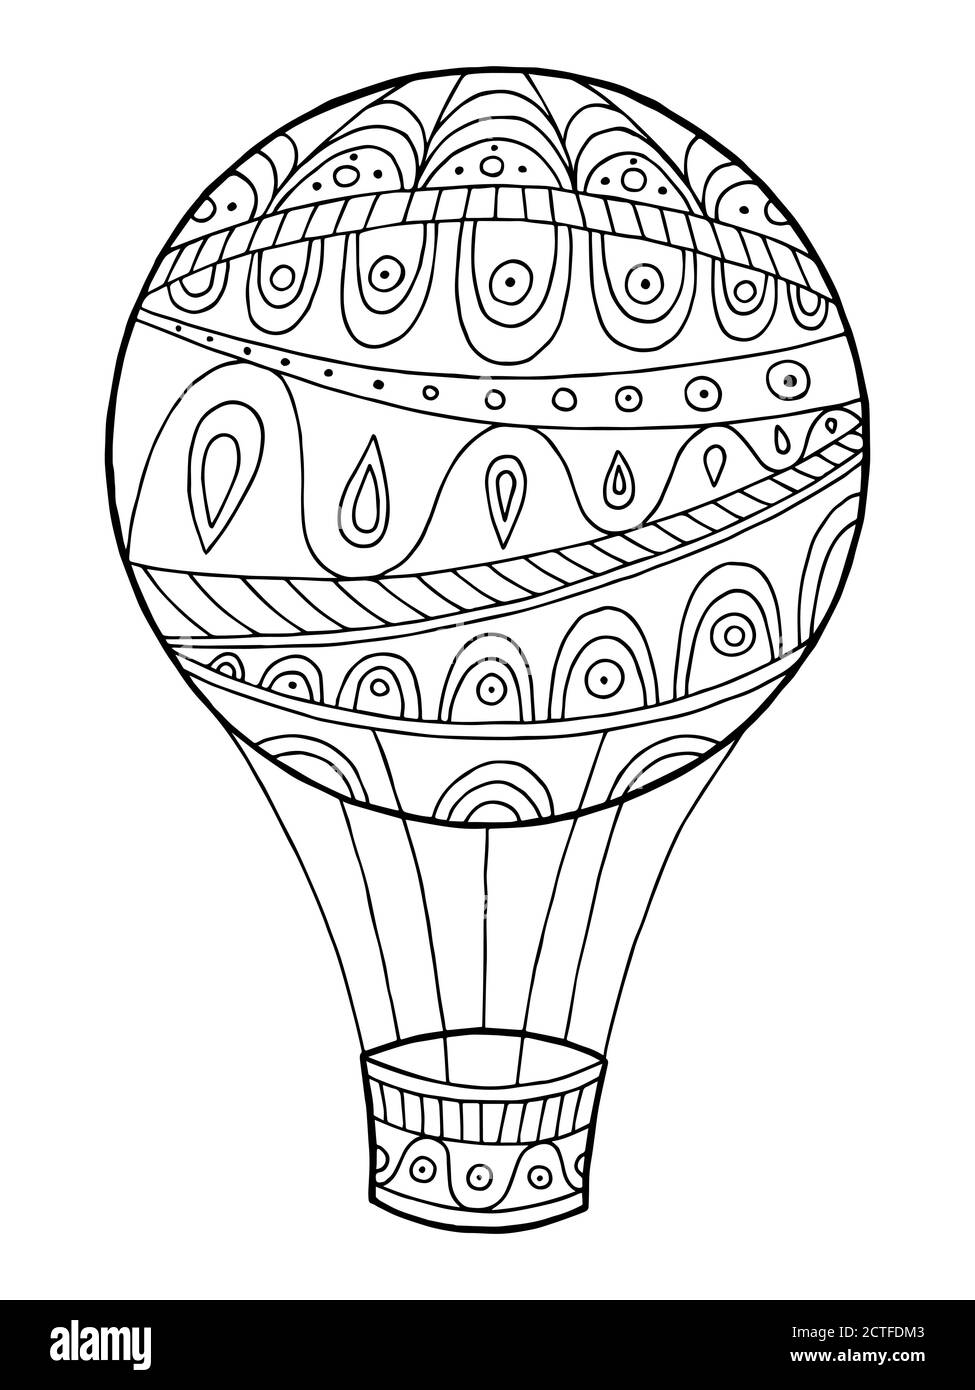 Air balloon pattern abstract graphic art black white doodle illustration vector Stock Vector